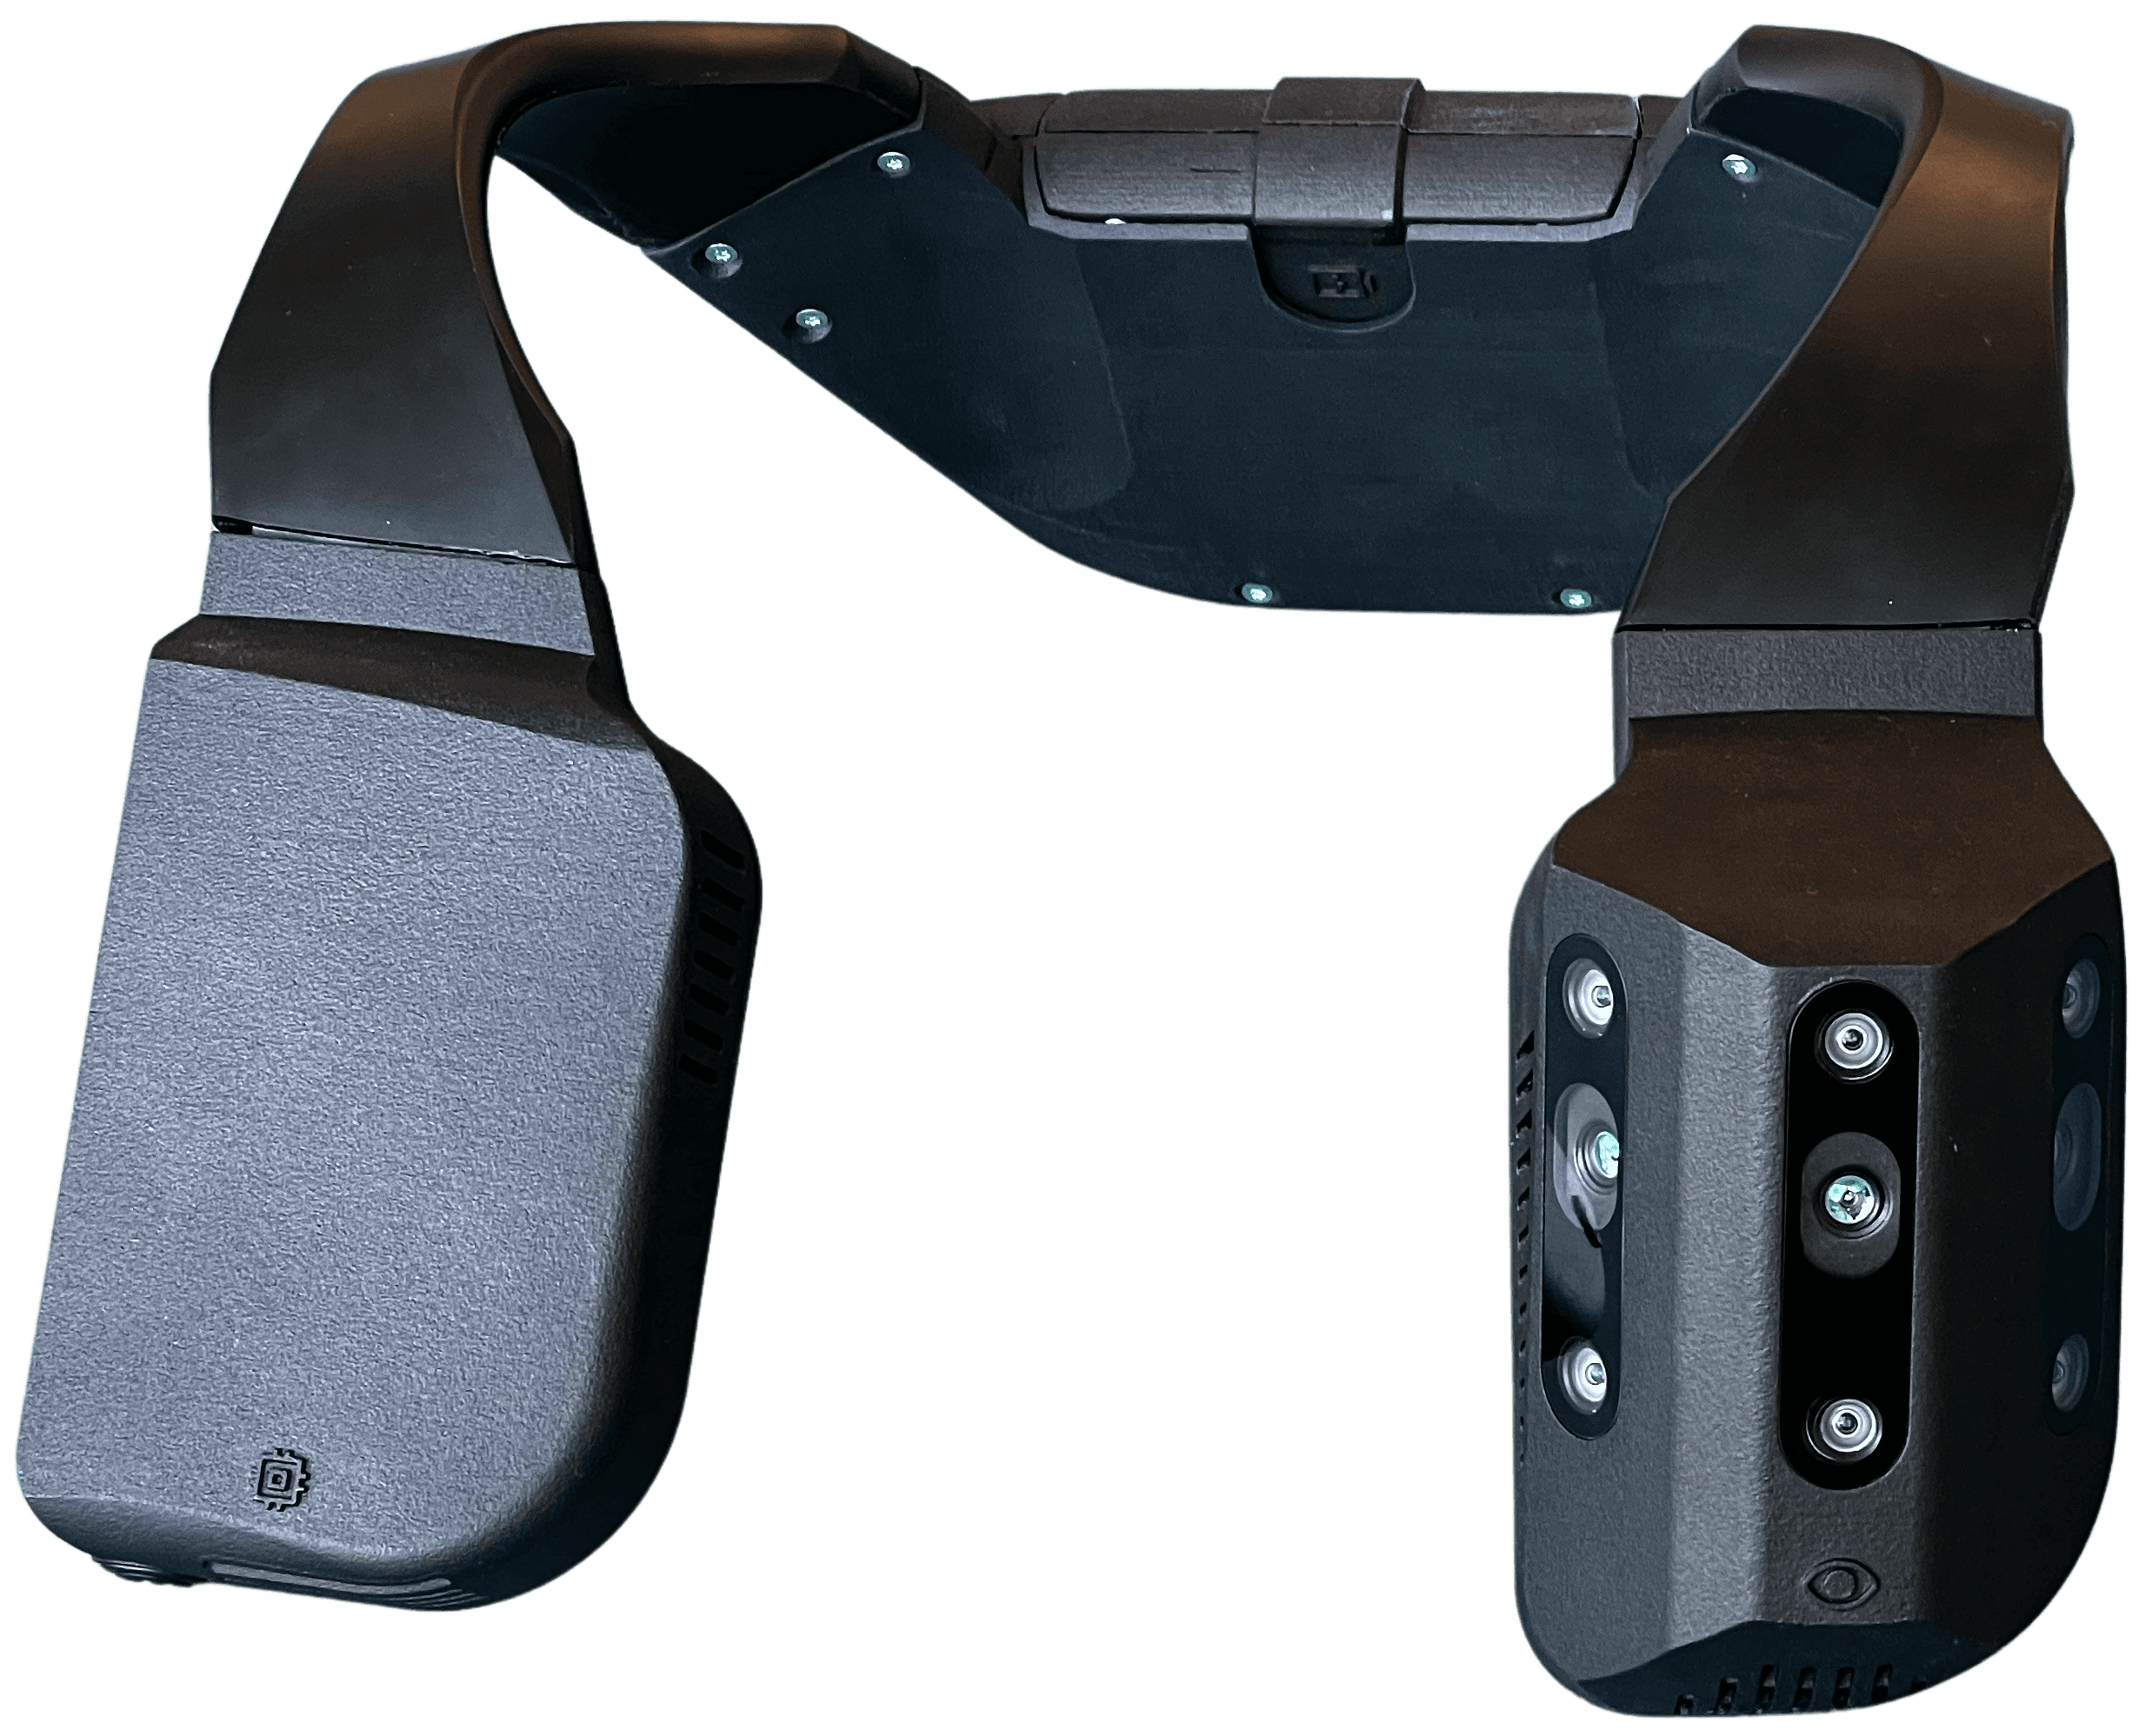 biped | Smart copilot for blind and visually impaired people